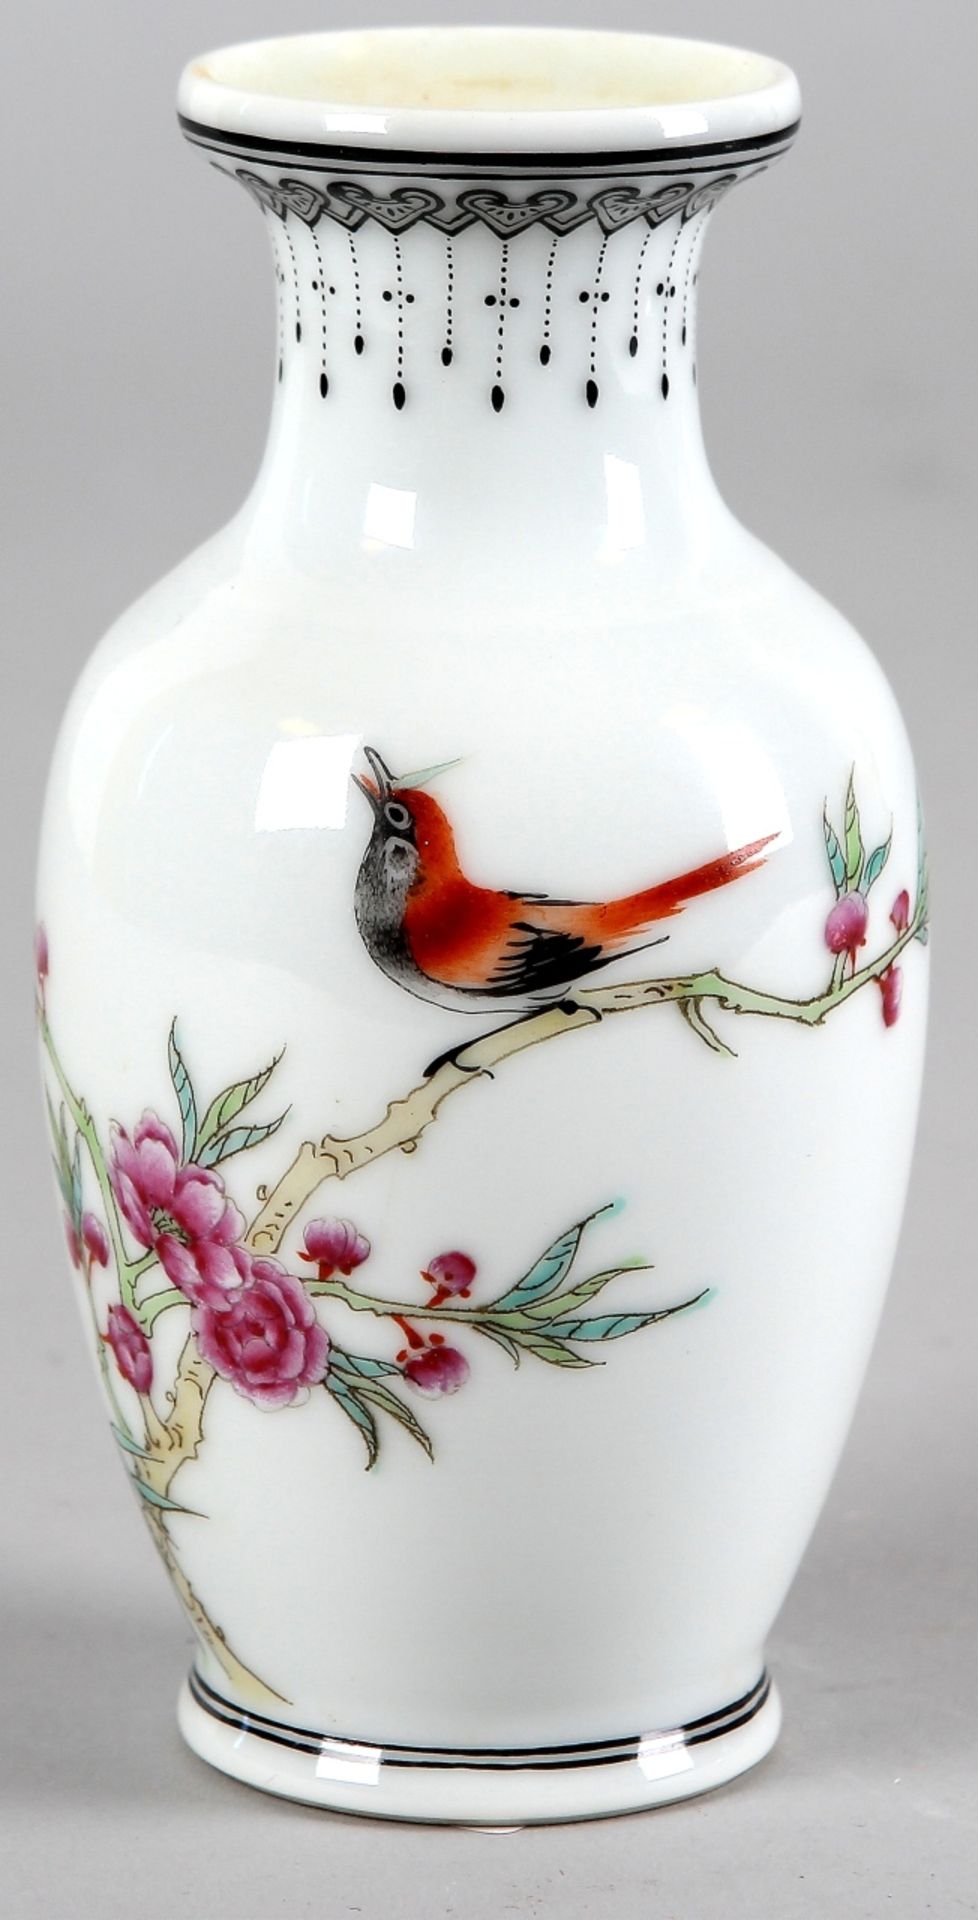 Ancient Chinese porcelain vase signed with text, bird on blossom, probably 1st half of 20th